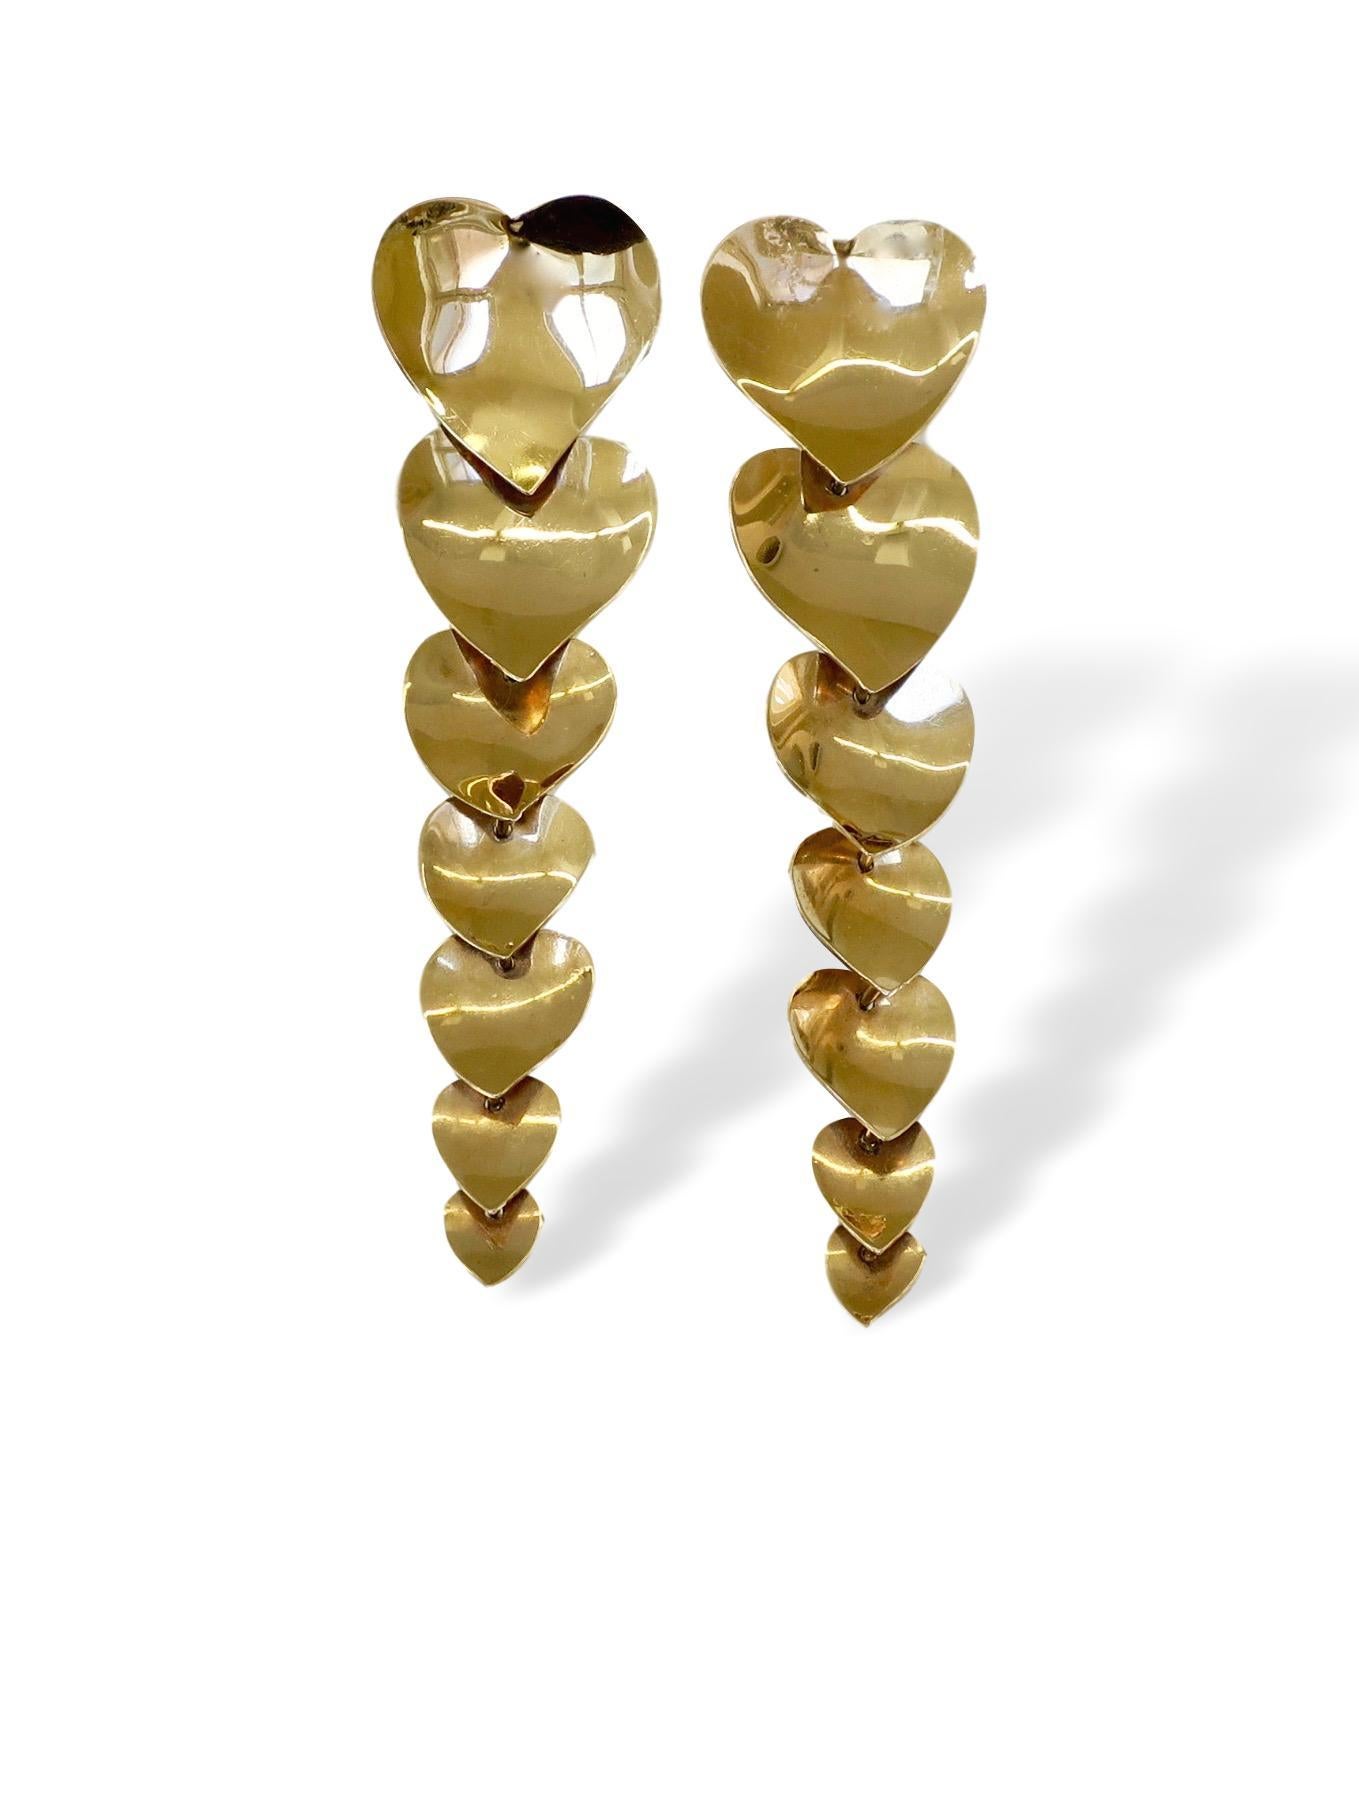 A charming pair of 14k yellow gold Heart- shaped earrings. The 14k mirror-finished gold post earrings made up of 7 graduated and articulated hearts ranging in size from 3/4